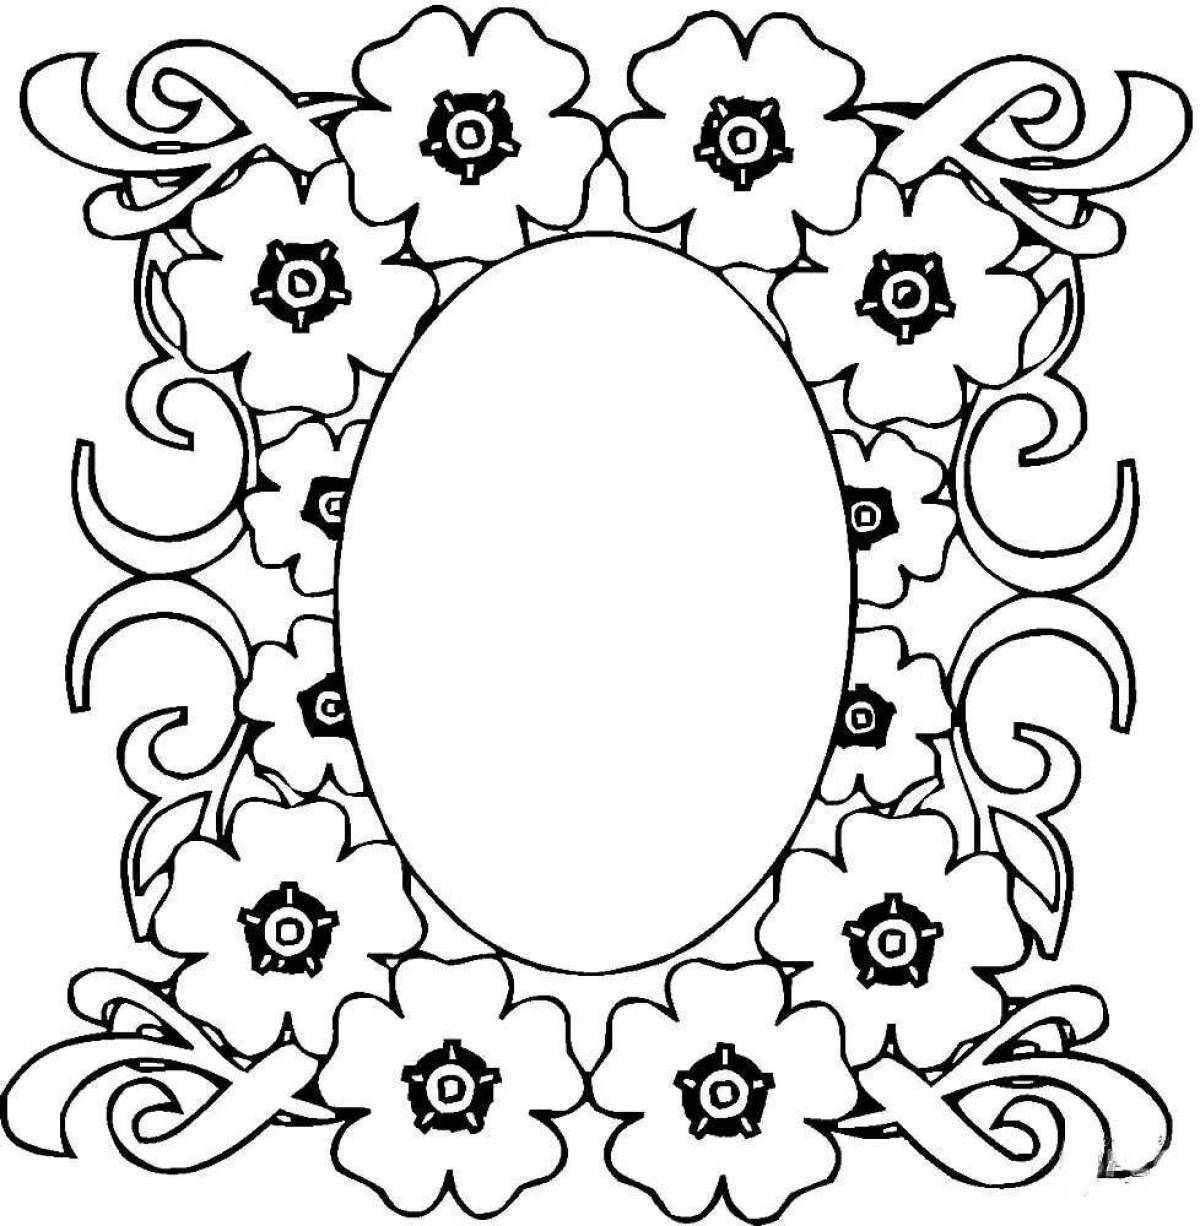 Exquisite portrait frame for coloring book